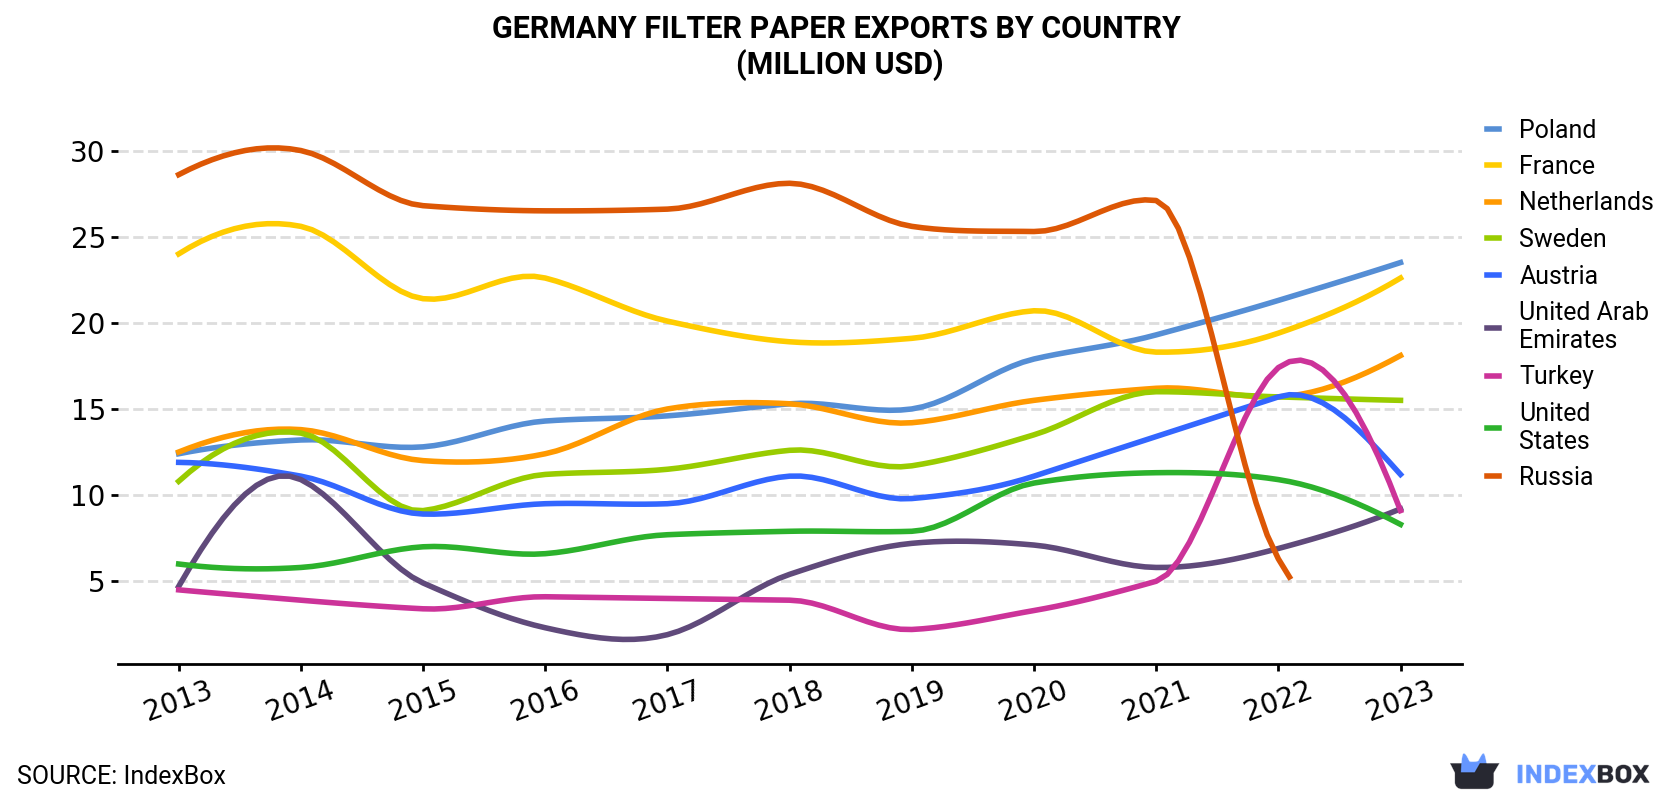 Germany Filter Paper Exports By Country (Million USD)